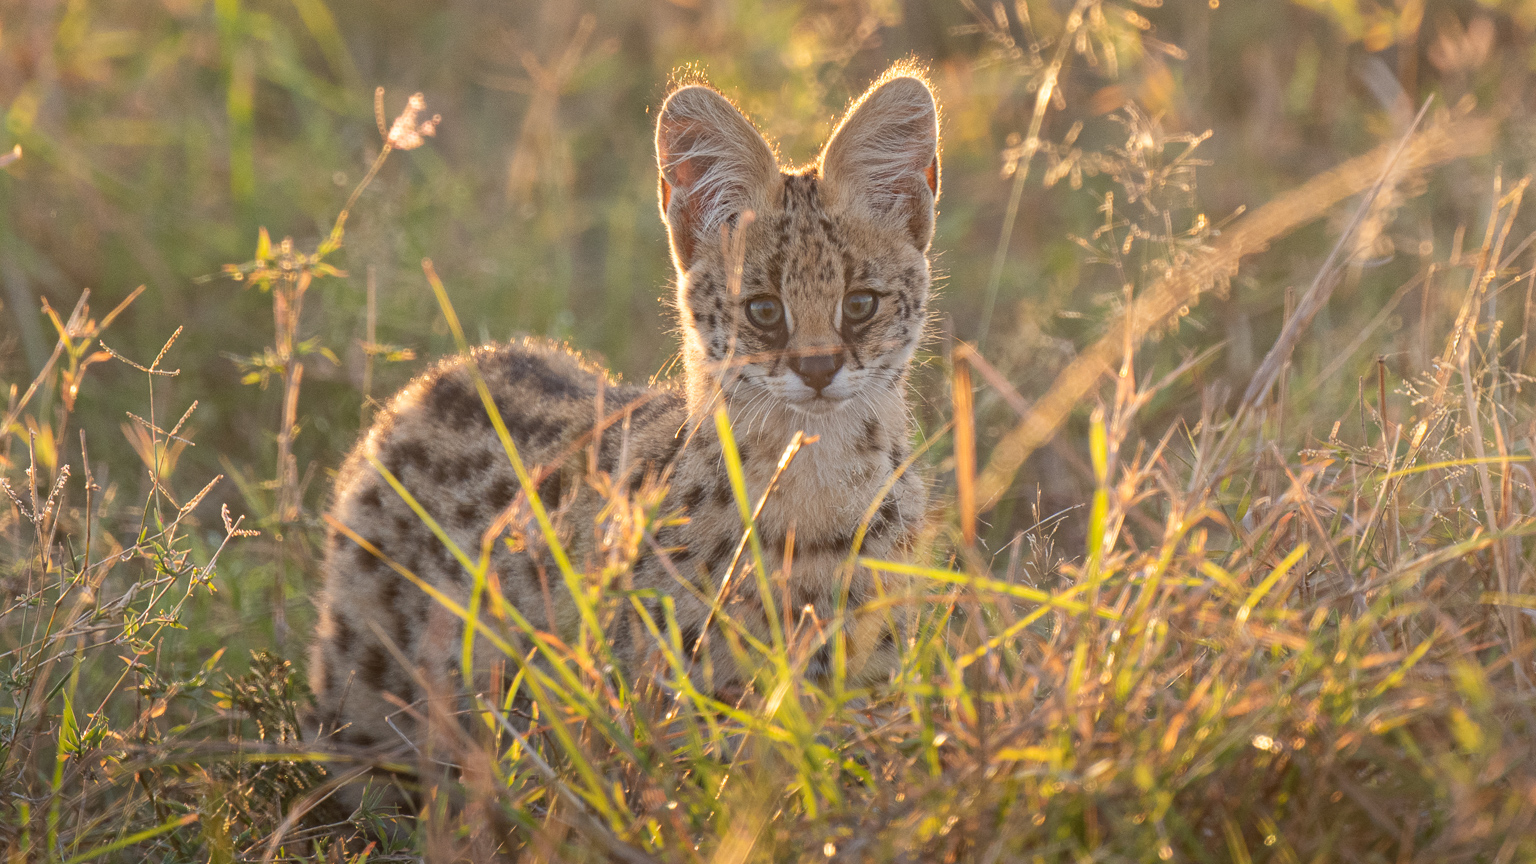 A serval kitten in long grass looking at the camera with sunrise shining light from the right. taken in masai mara, kenya by ian mears